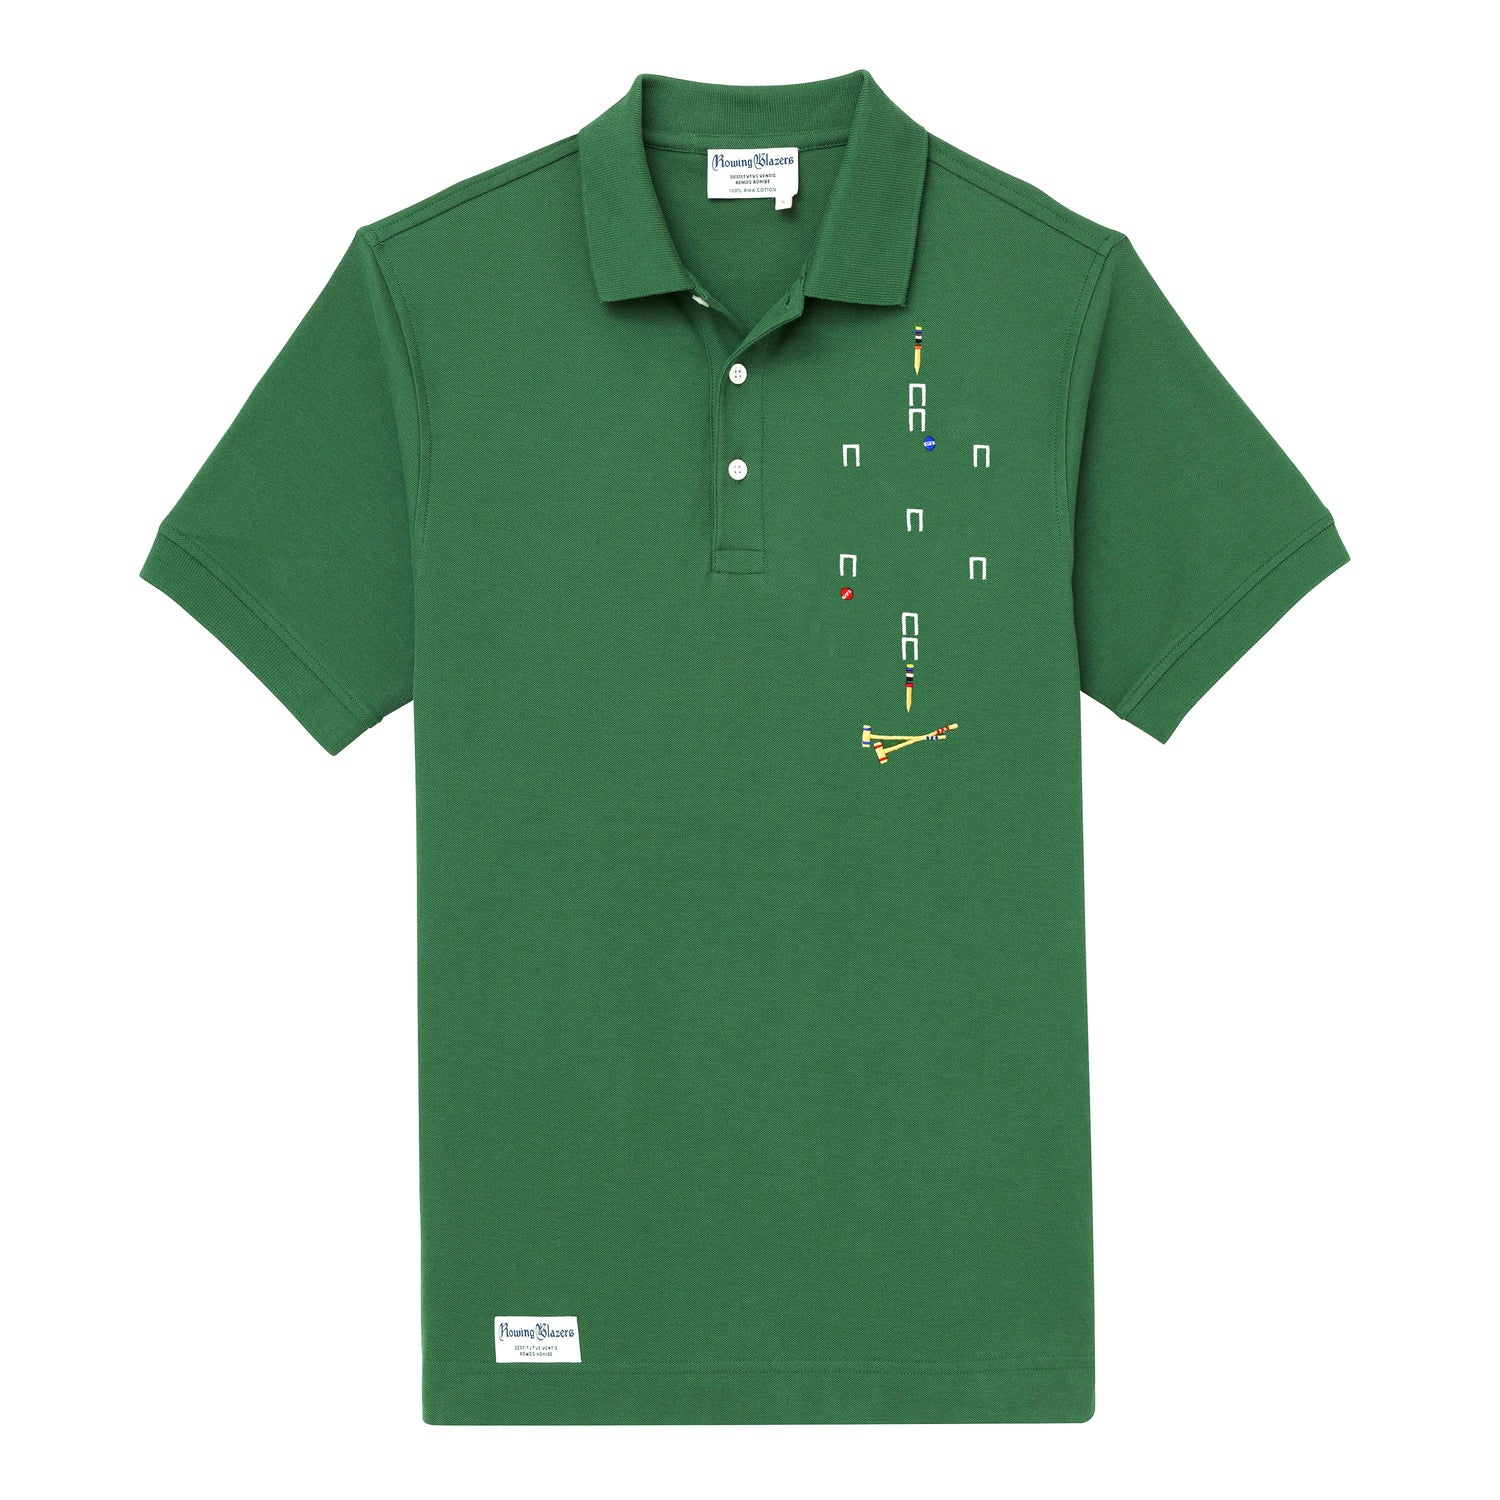 Polo jersey with satin stitched croquet court motif.